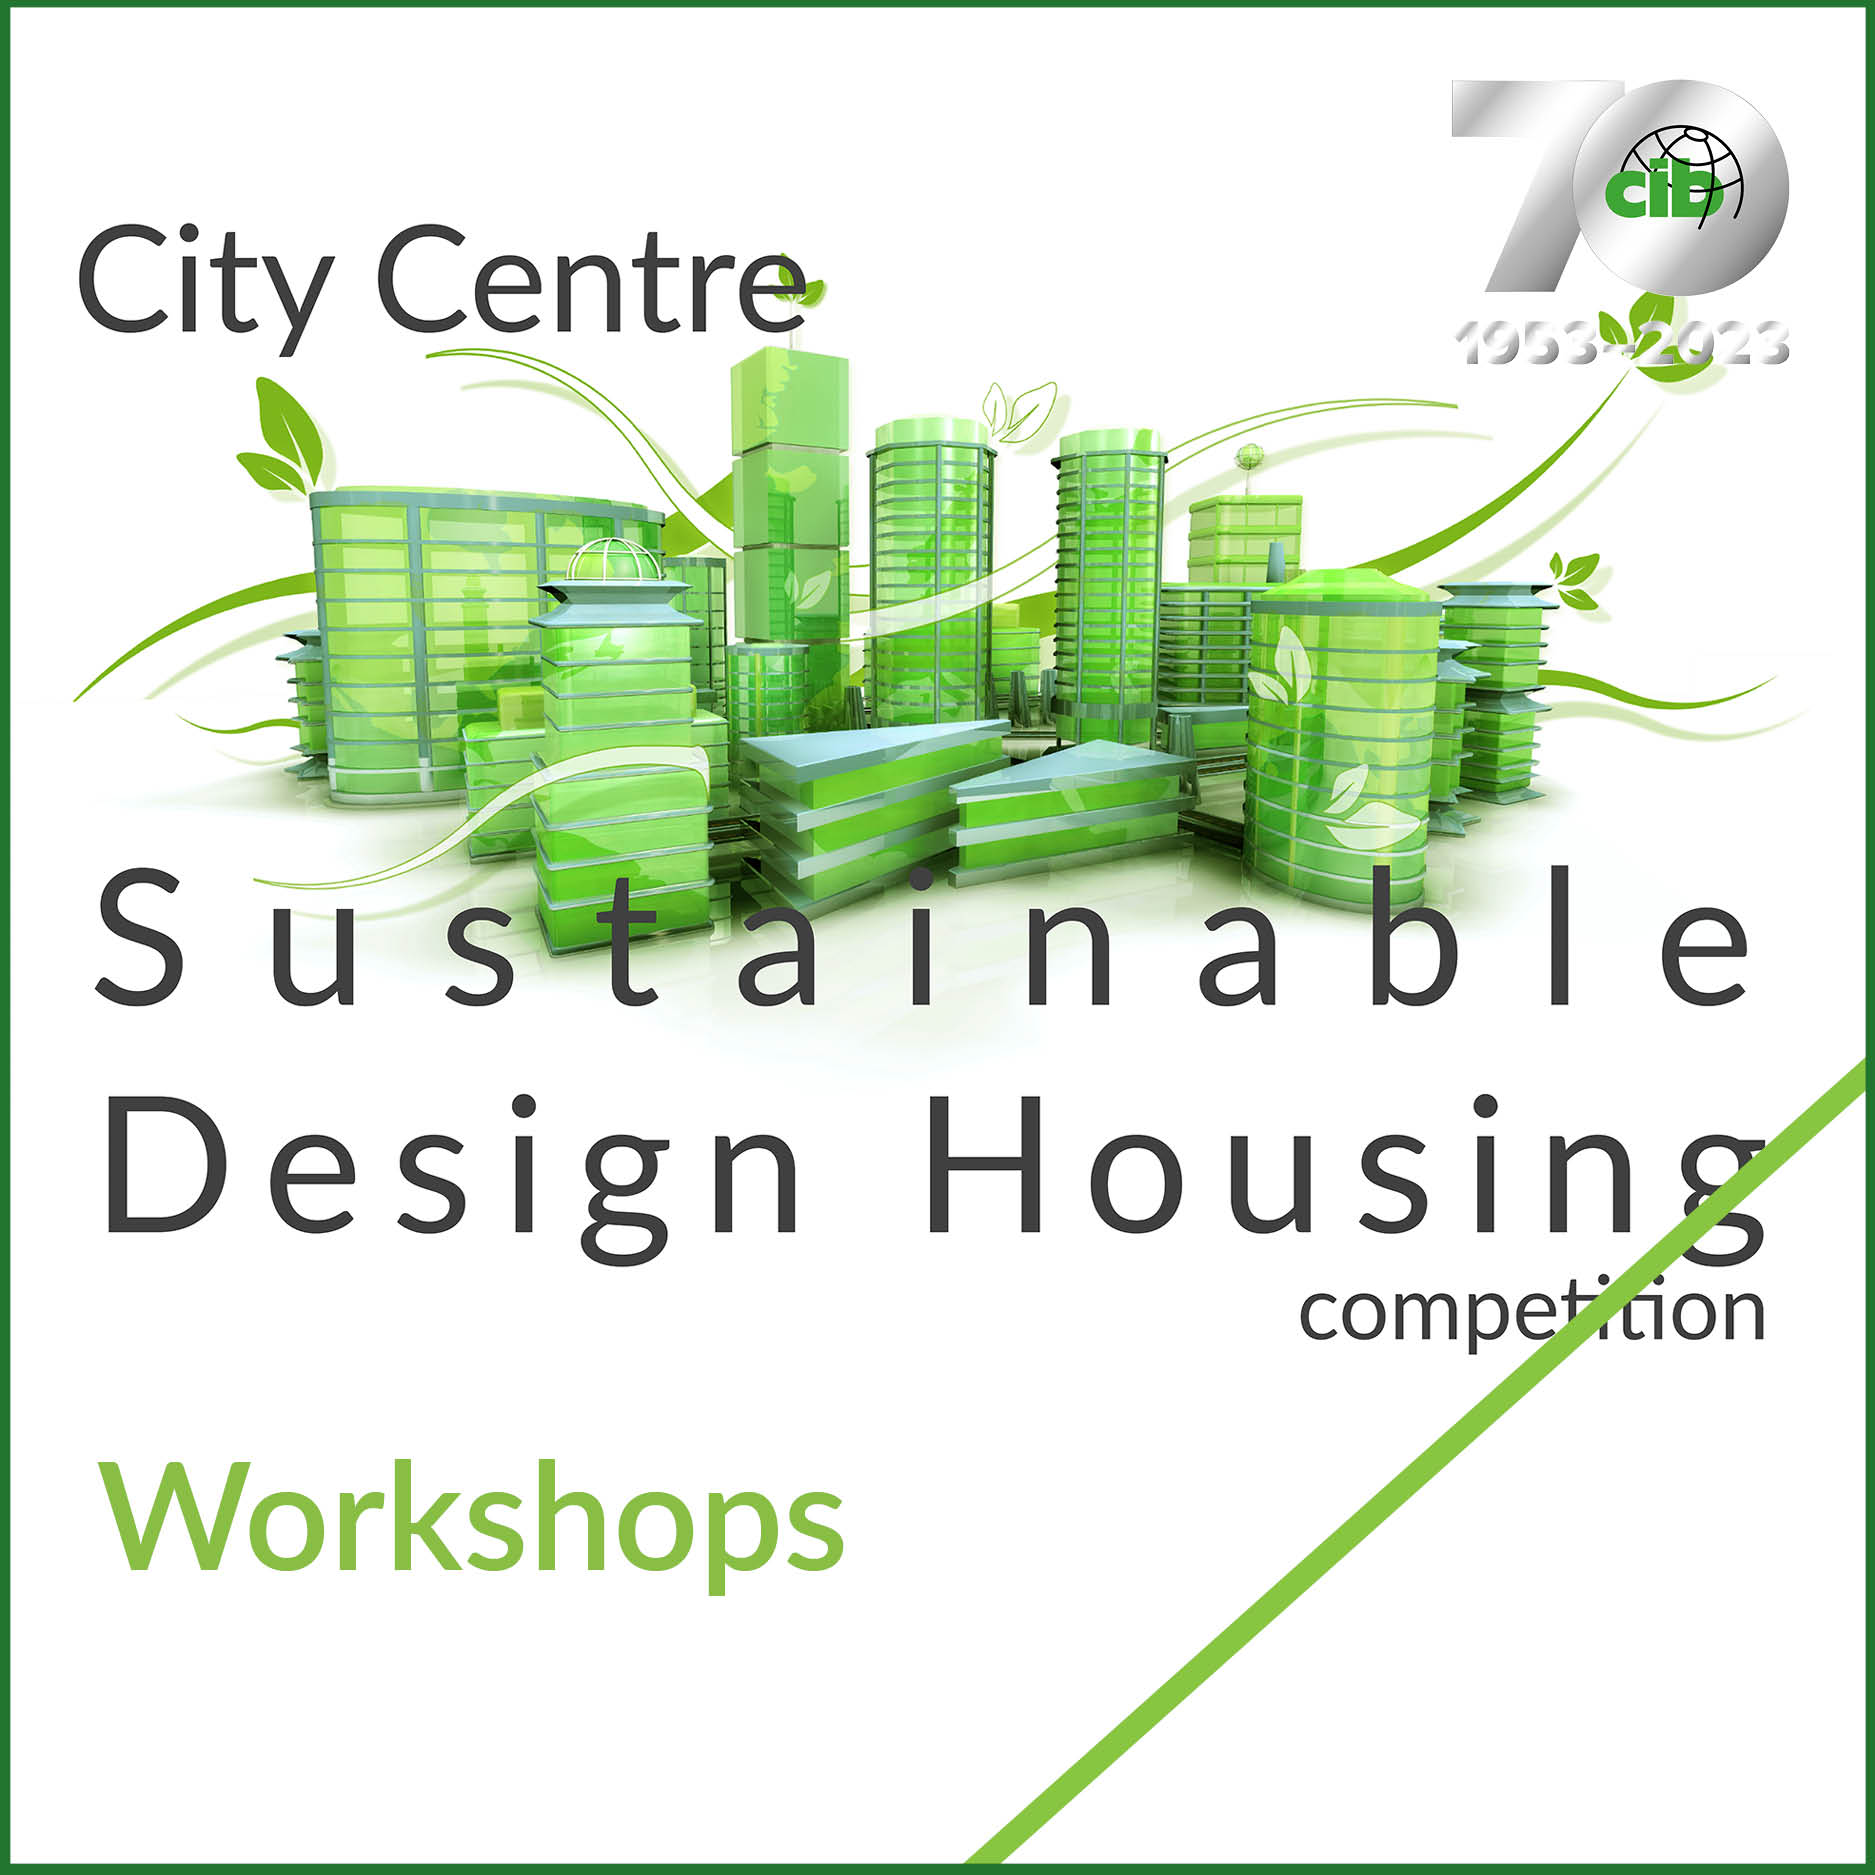 City Centre Sustainable Design Housing competition workshops